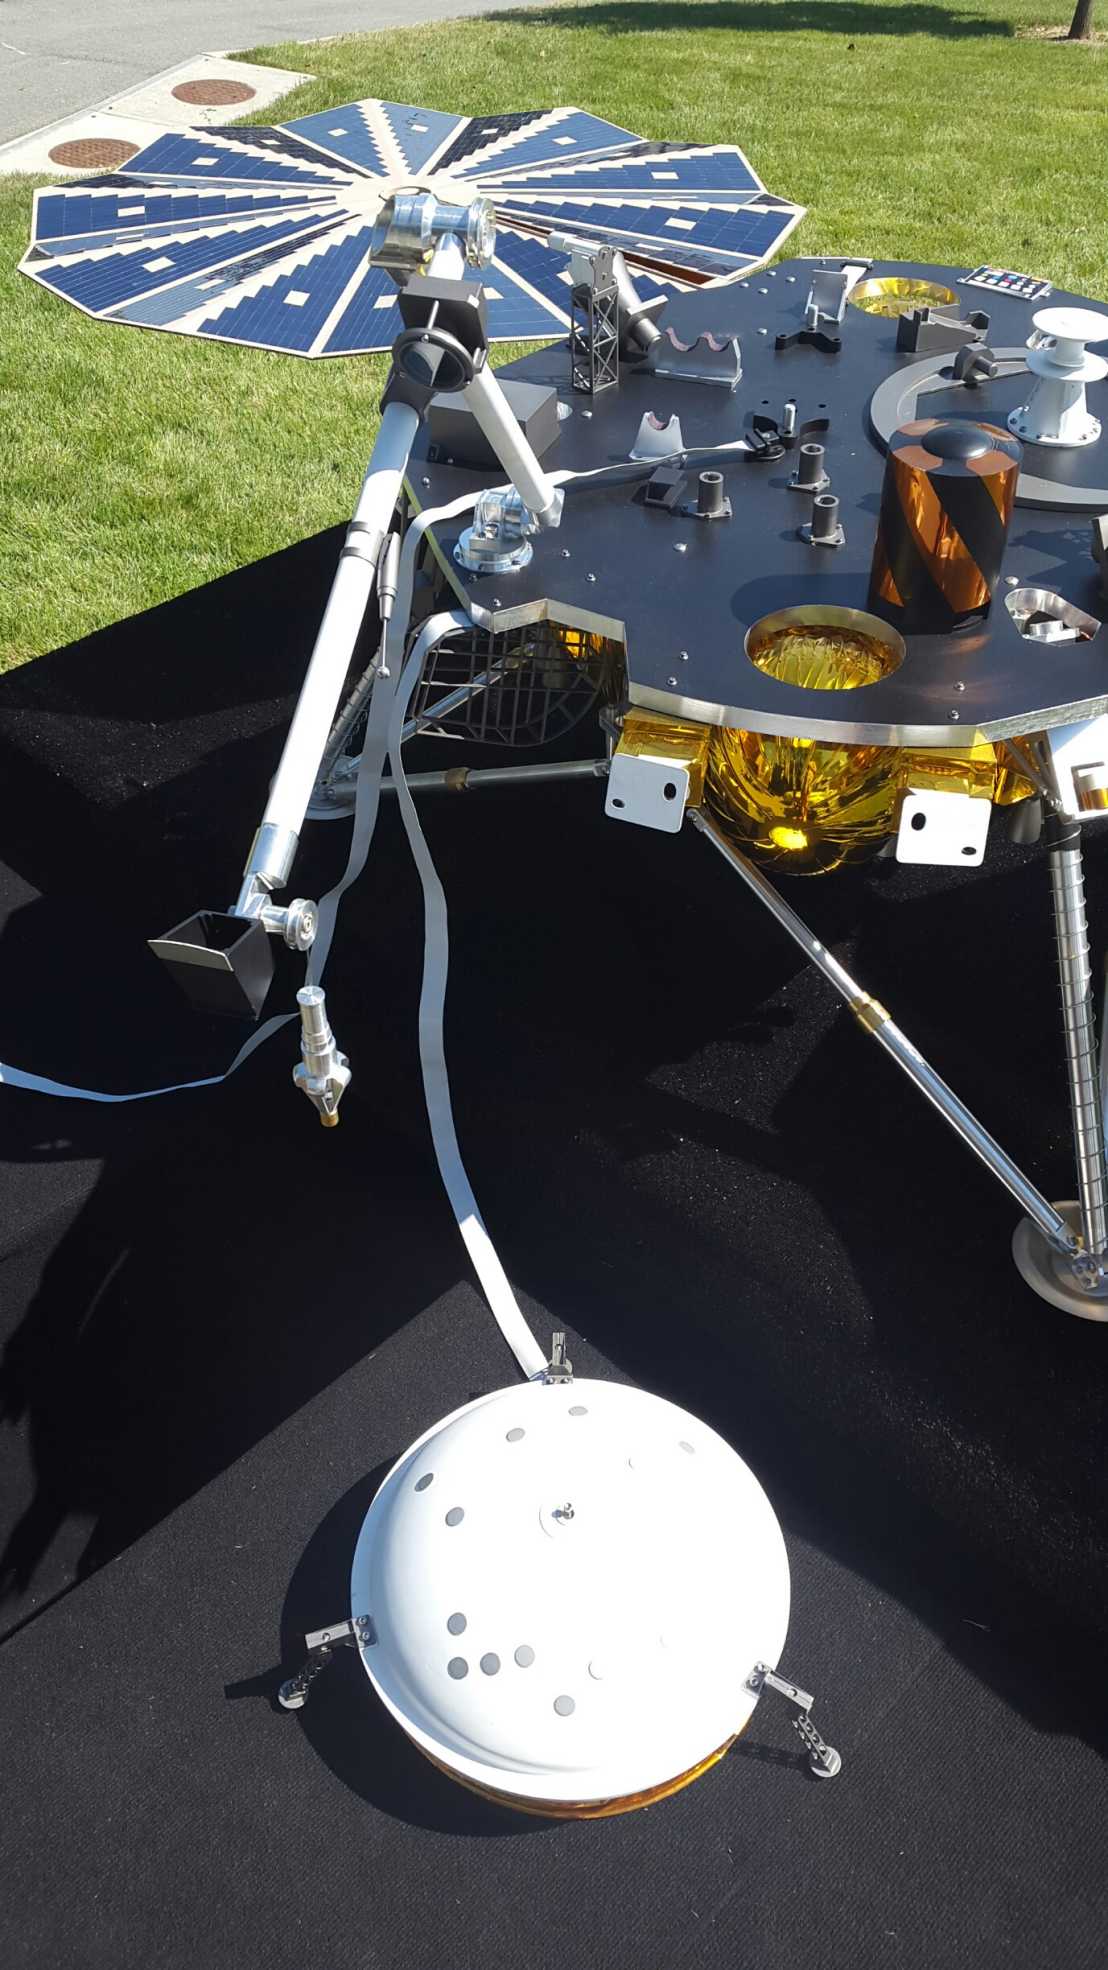 Image of the InSight Mars Lander (1:2 scale model) displayed during the Soirée Suisse 2015 event in Washington D.C.   Photo: ETH Zurich, Ulrike Kastrup